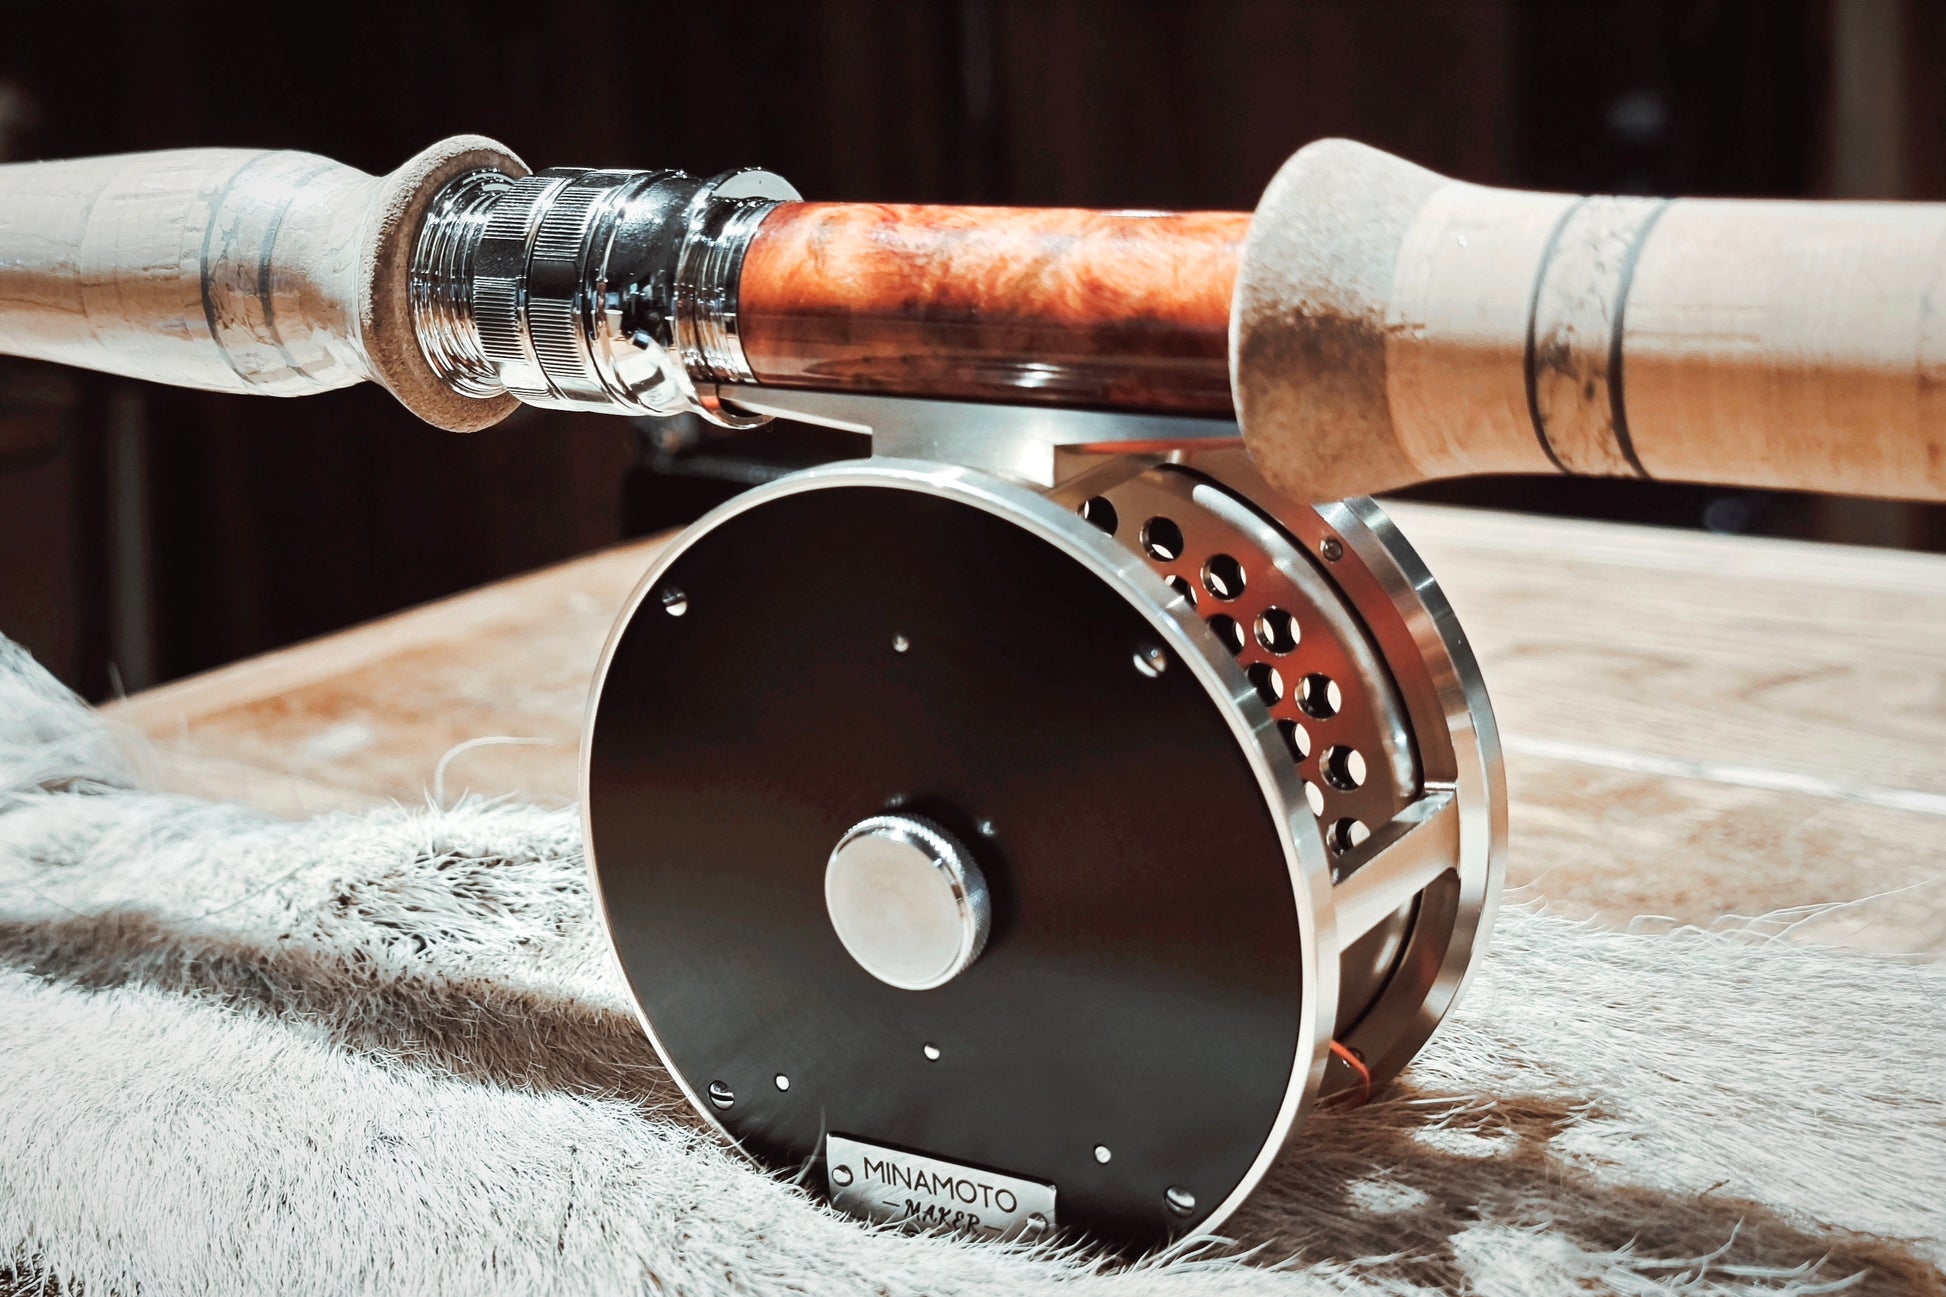 The NIKKO Classic fly reel - A S.E.Bogdan's style reel from